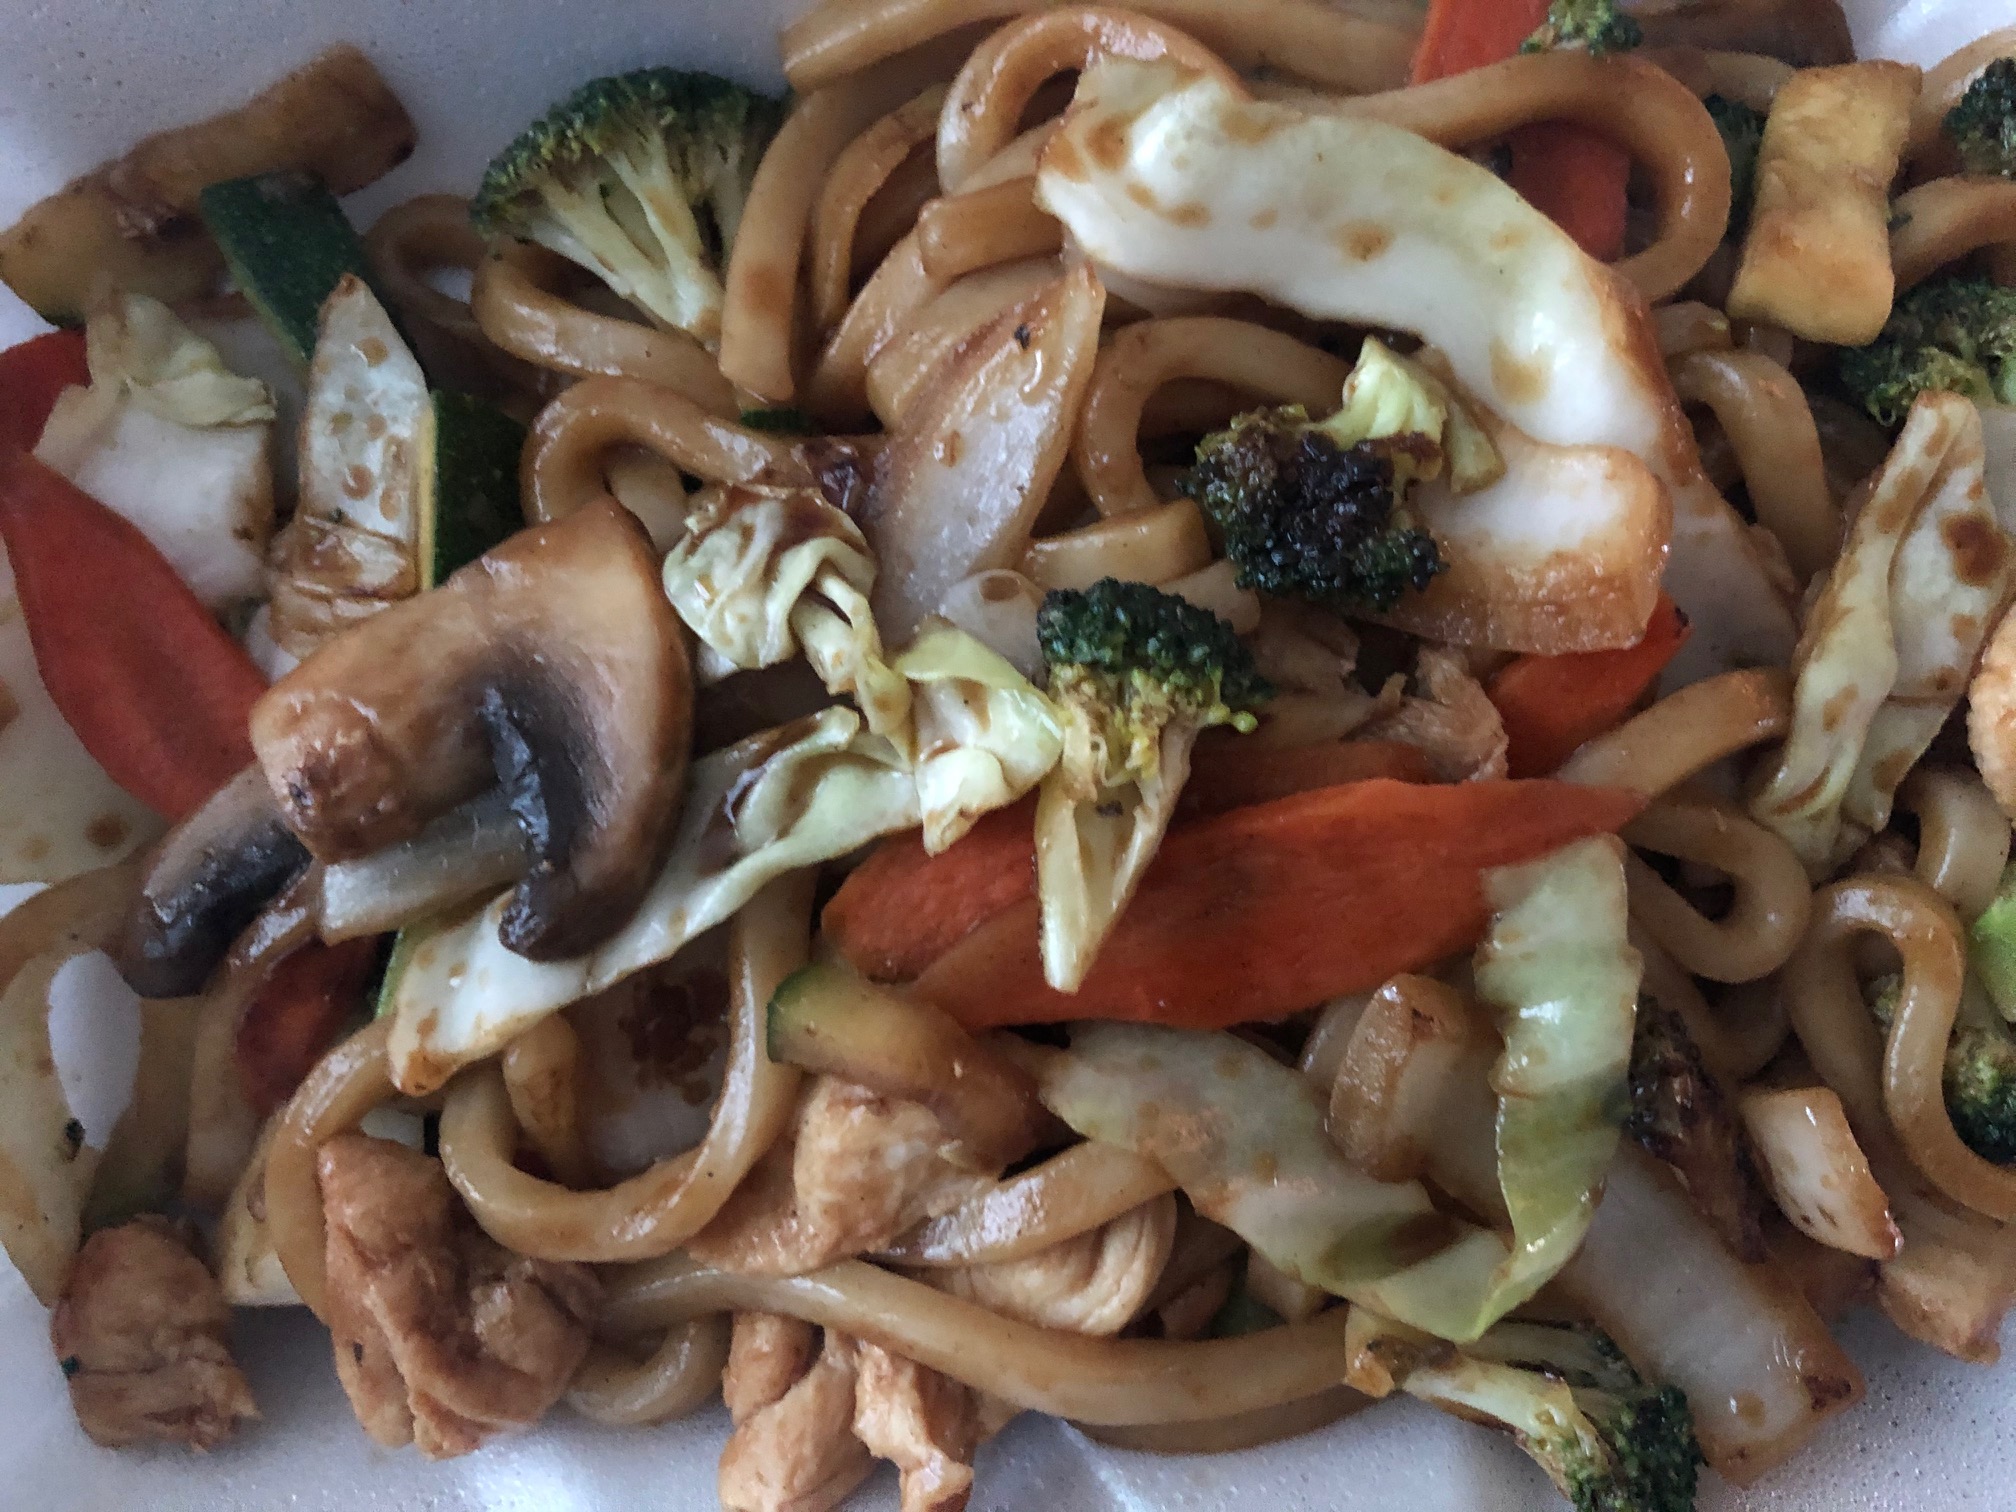 A close up photo of the chicken yaki udon noodles from Sushi Kame featuring mushrooms, broccoli, and onions in between thick noodles. Photo by Alyssa Buckley.